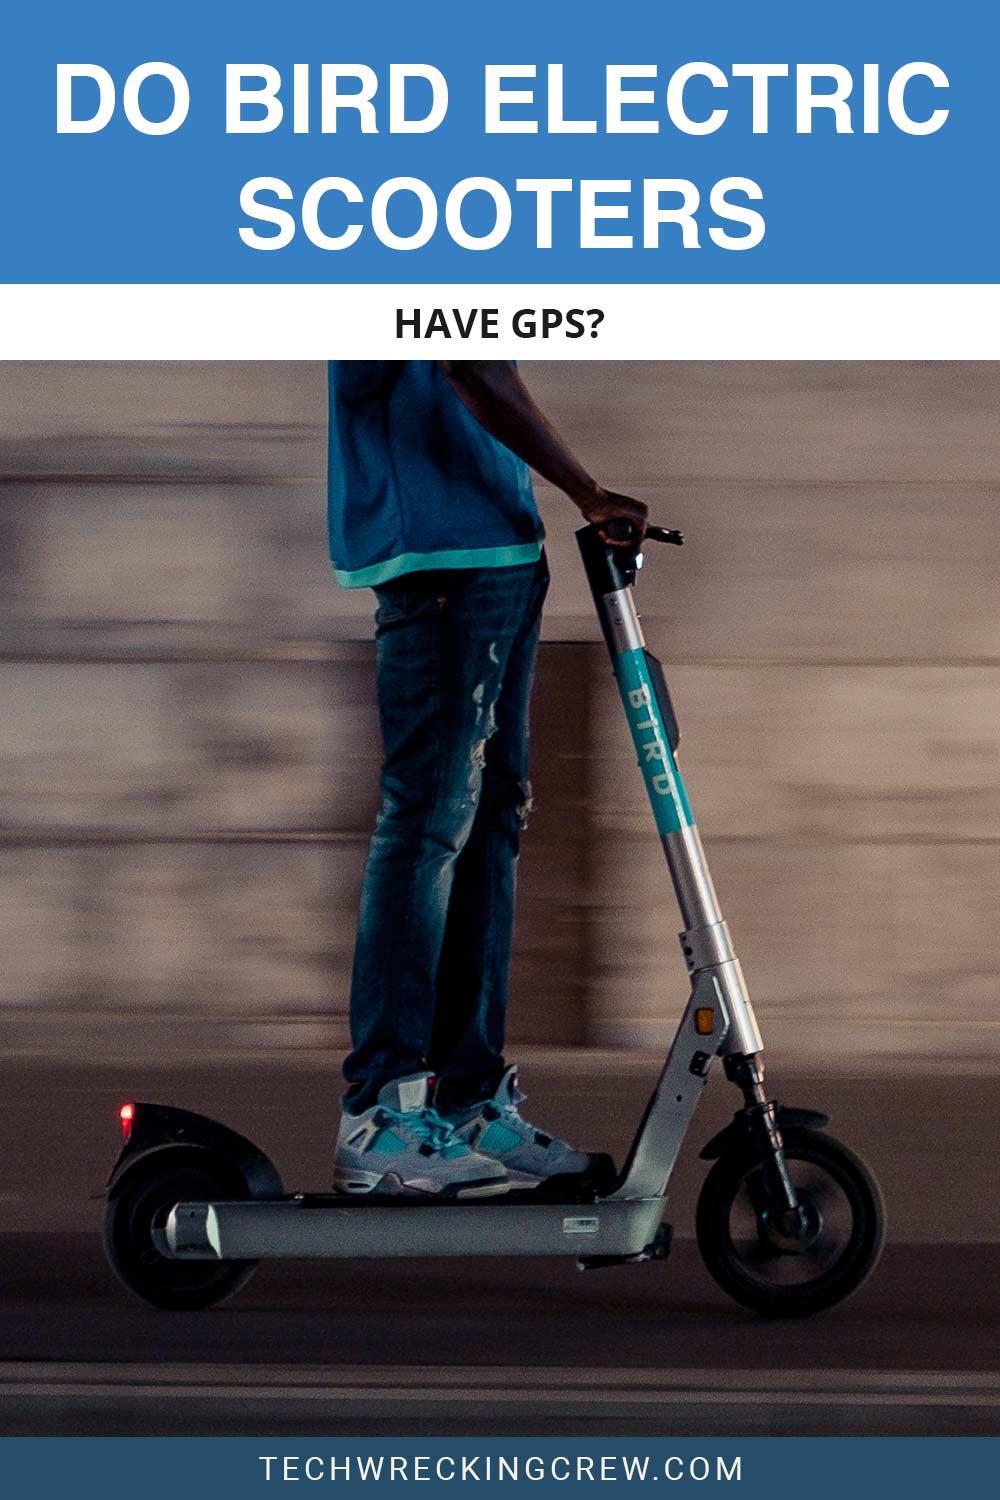 Do Bird Electric Scooters Have GPS?